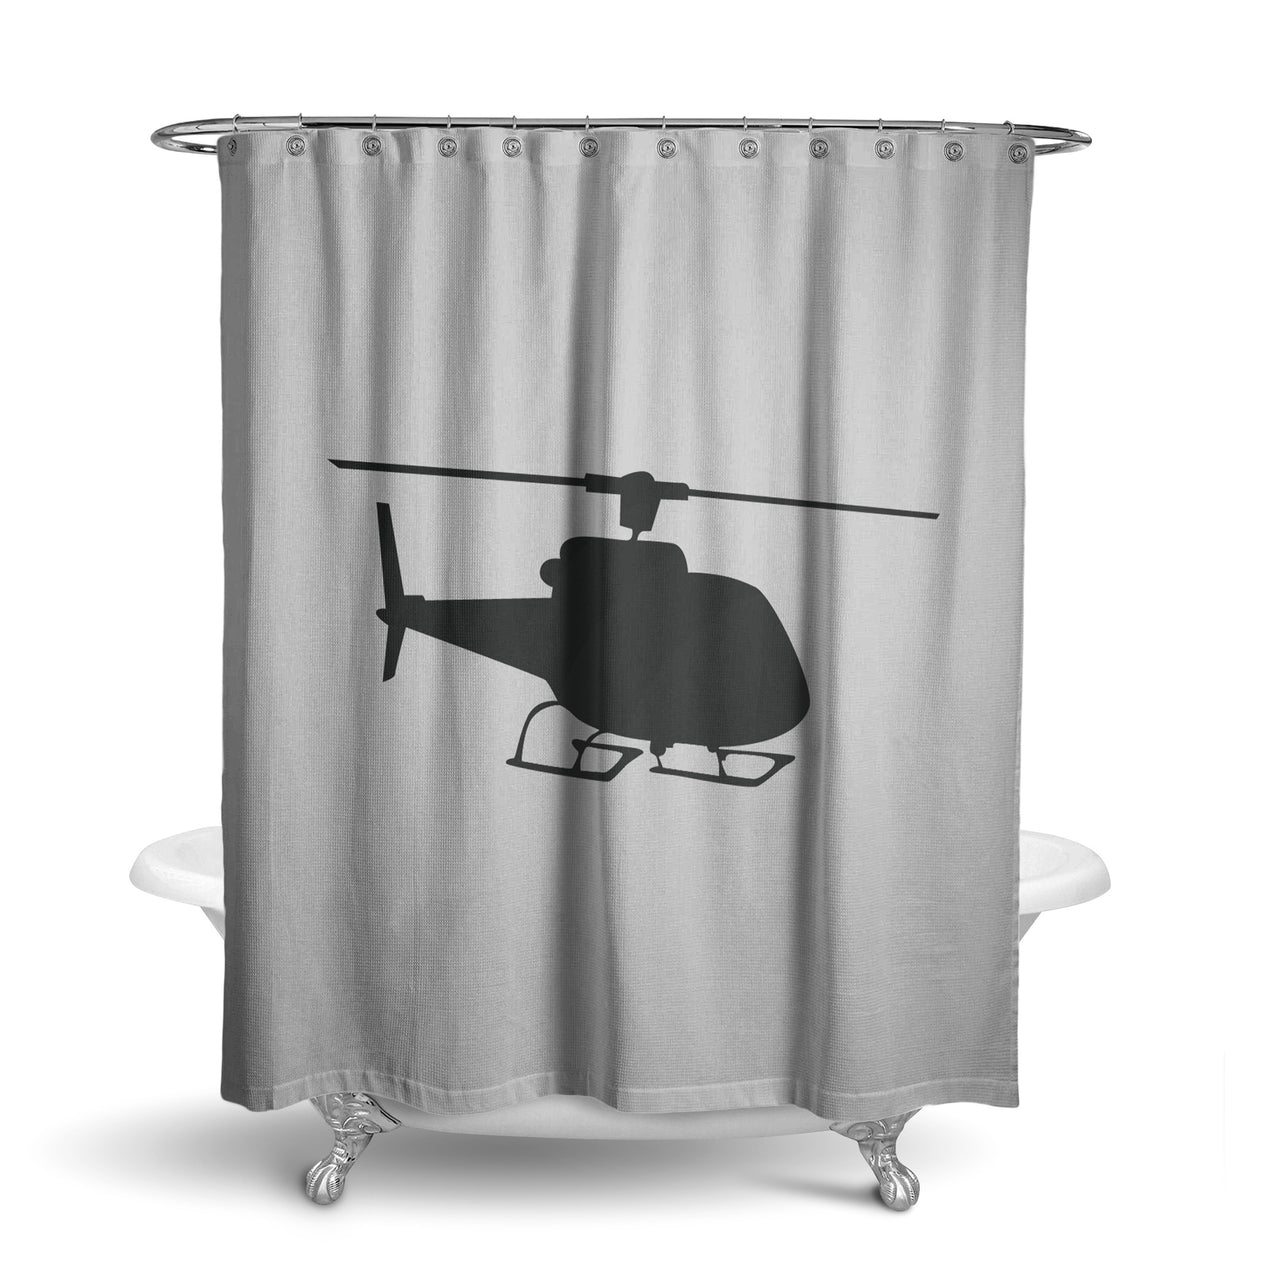 Helicopter Designed Shower Curtains